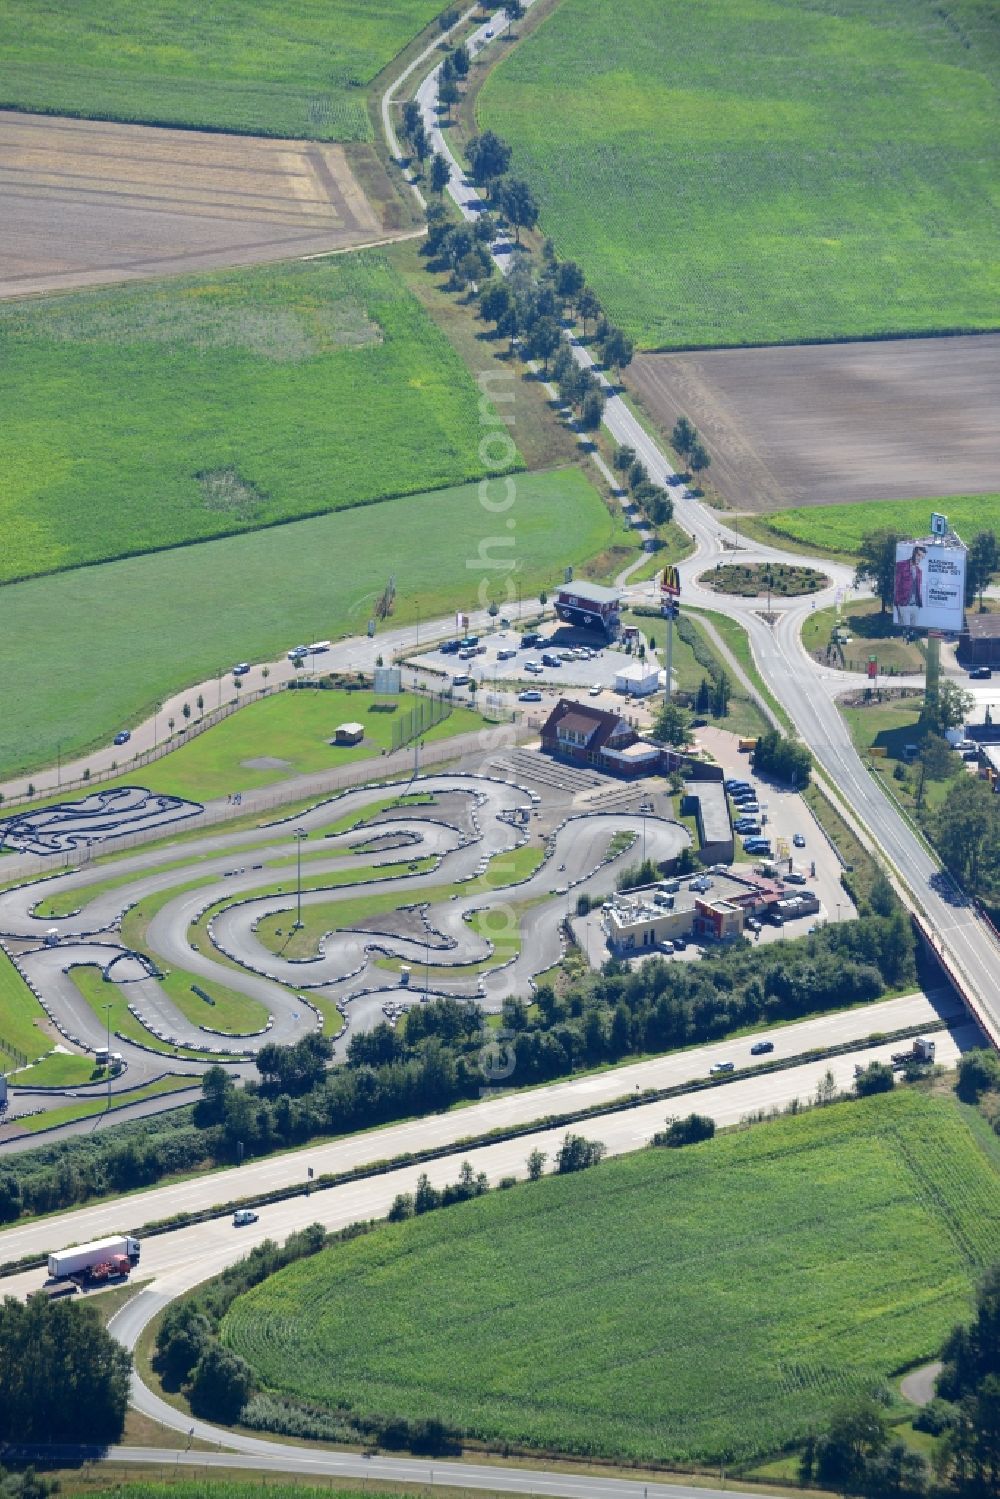 Aerial photograph Bispingen - Site of the go-kart race track Ralf Schumacher Kart & Bowl at the BAB federal motorway E45 - A7 Bispingen in the state of Lower Saxony